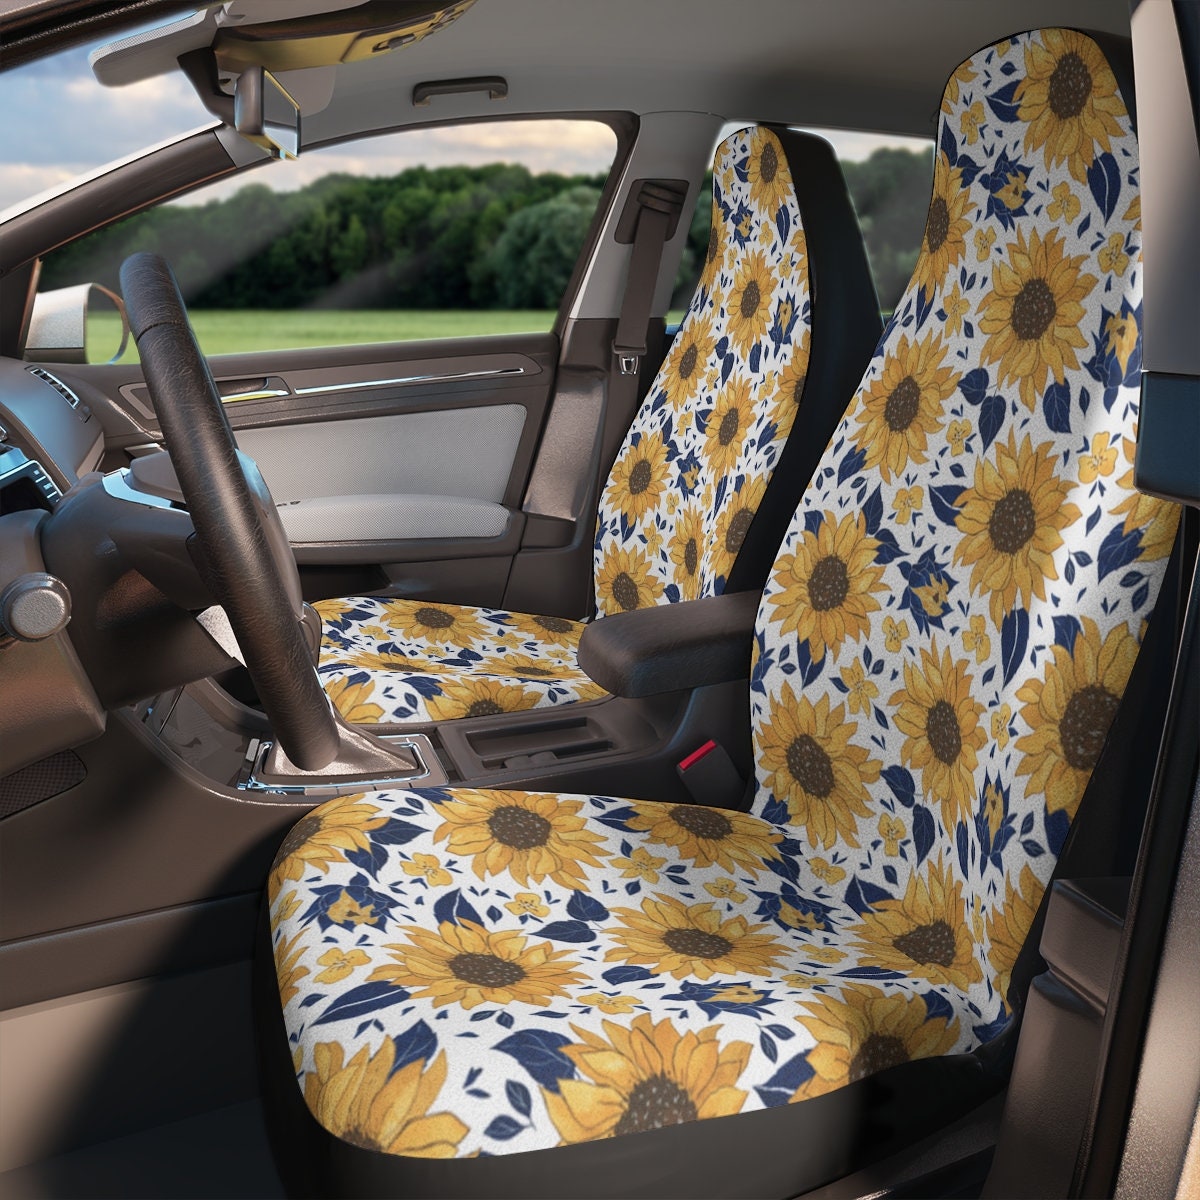 Car Seat Covers, Floral Cute Car Accessories for Women, Sunflower Hippie Car Decor, Universal Car Chair Cover, Boho Vehicle Seat Cover